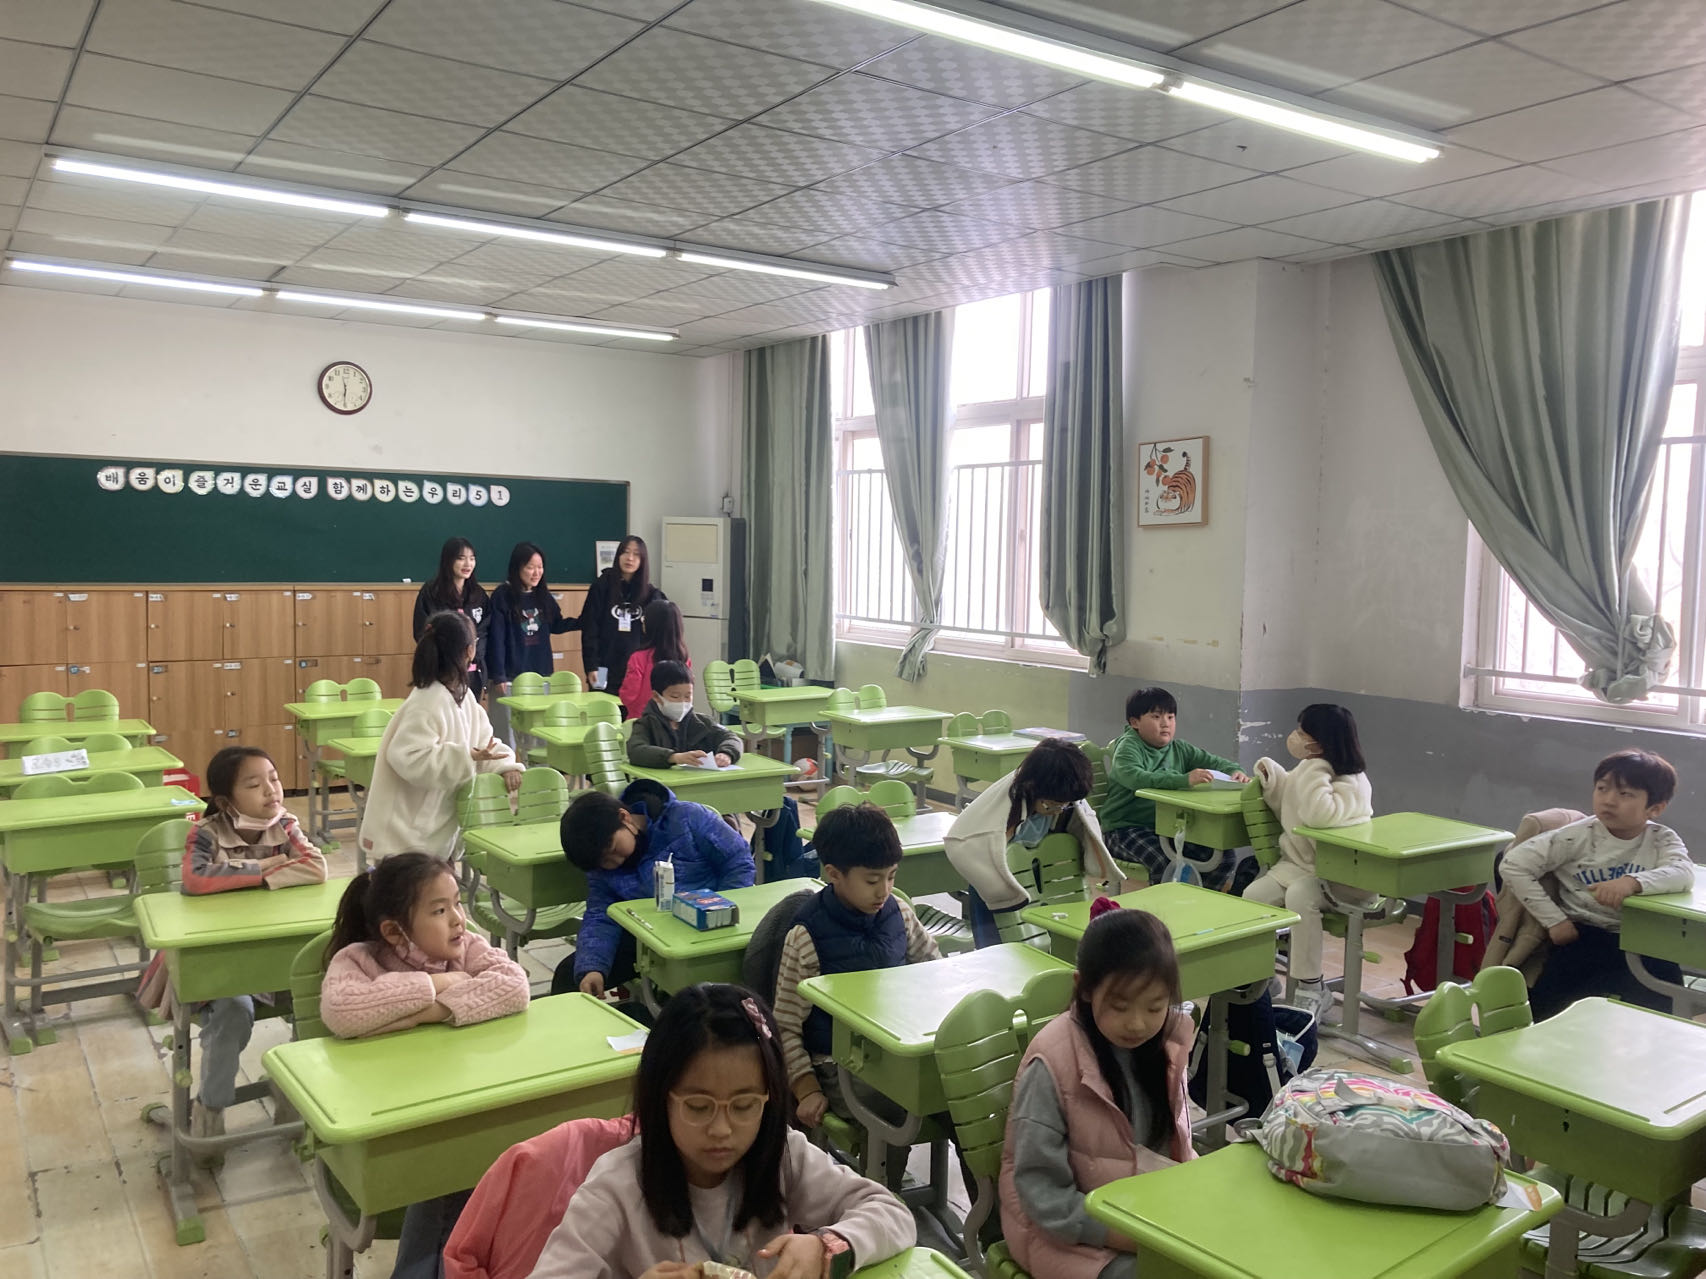 Students of the lower grades gather in class on the first day of the Hangeul School in Qingdao